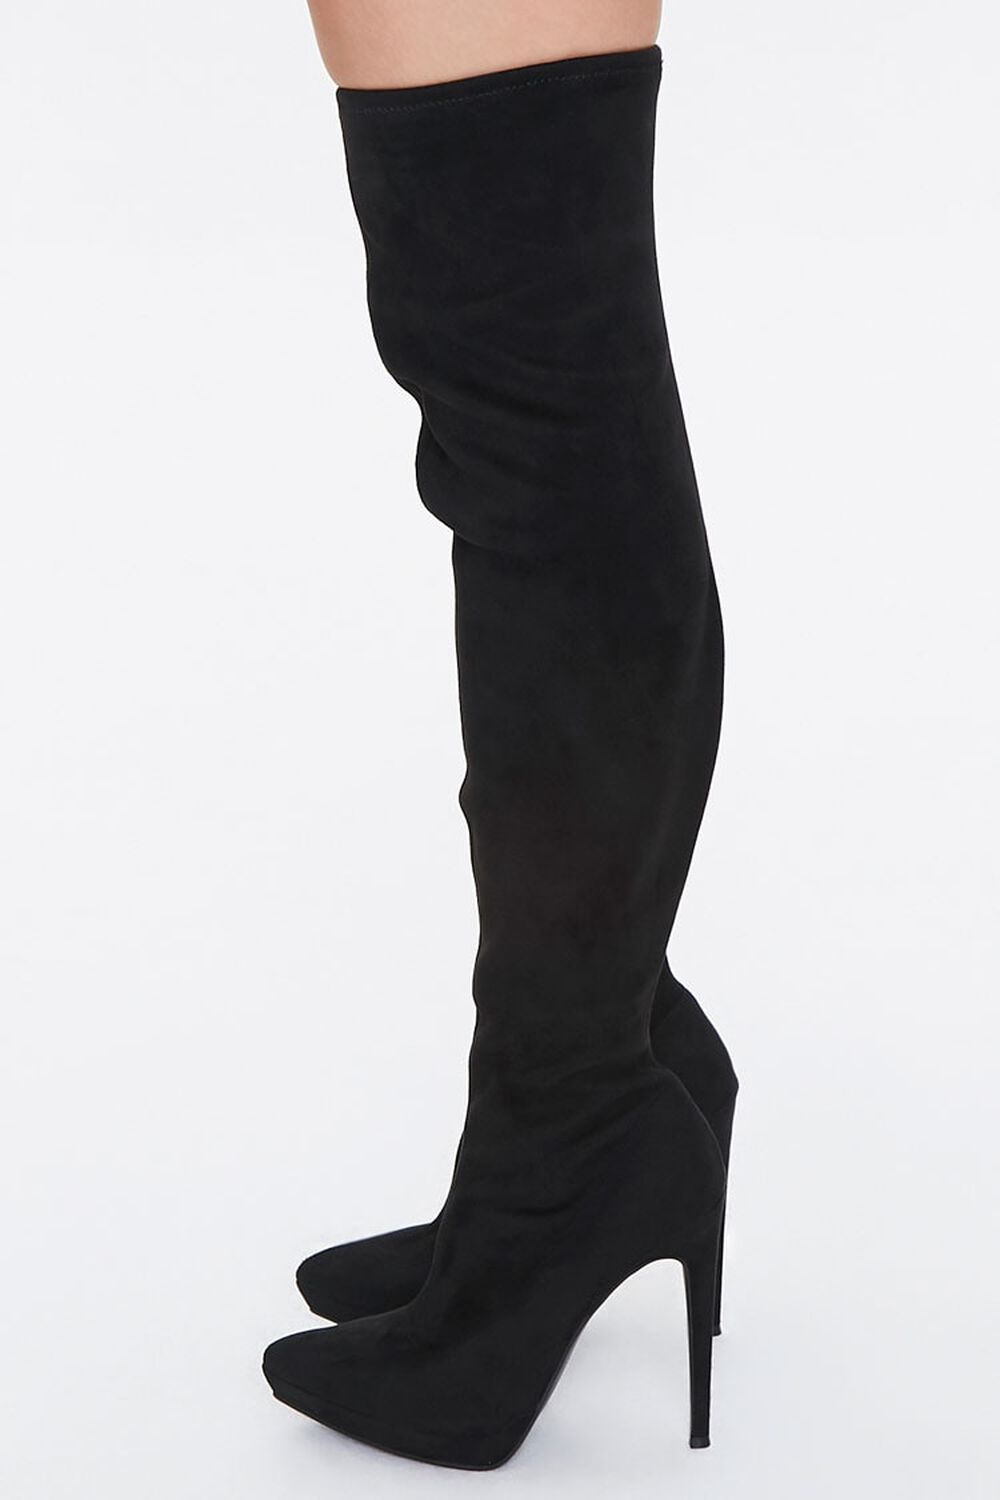 Over-the-Knee Stiletto Boots